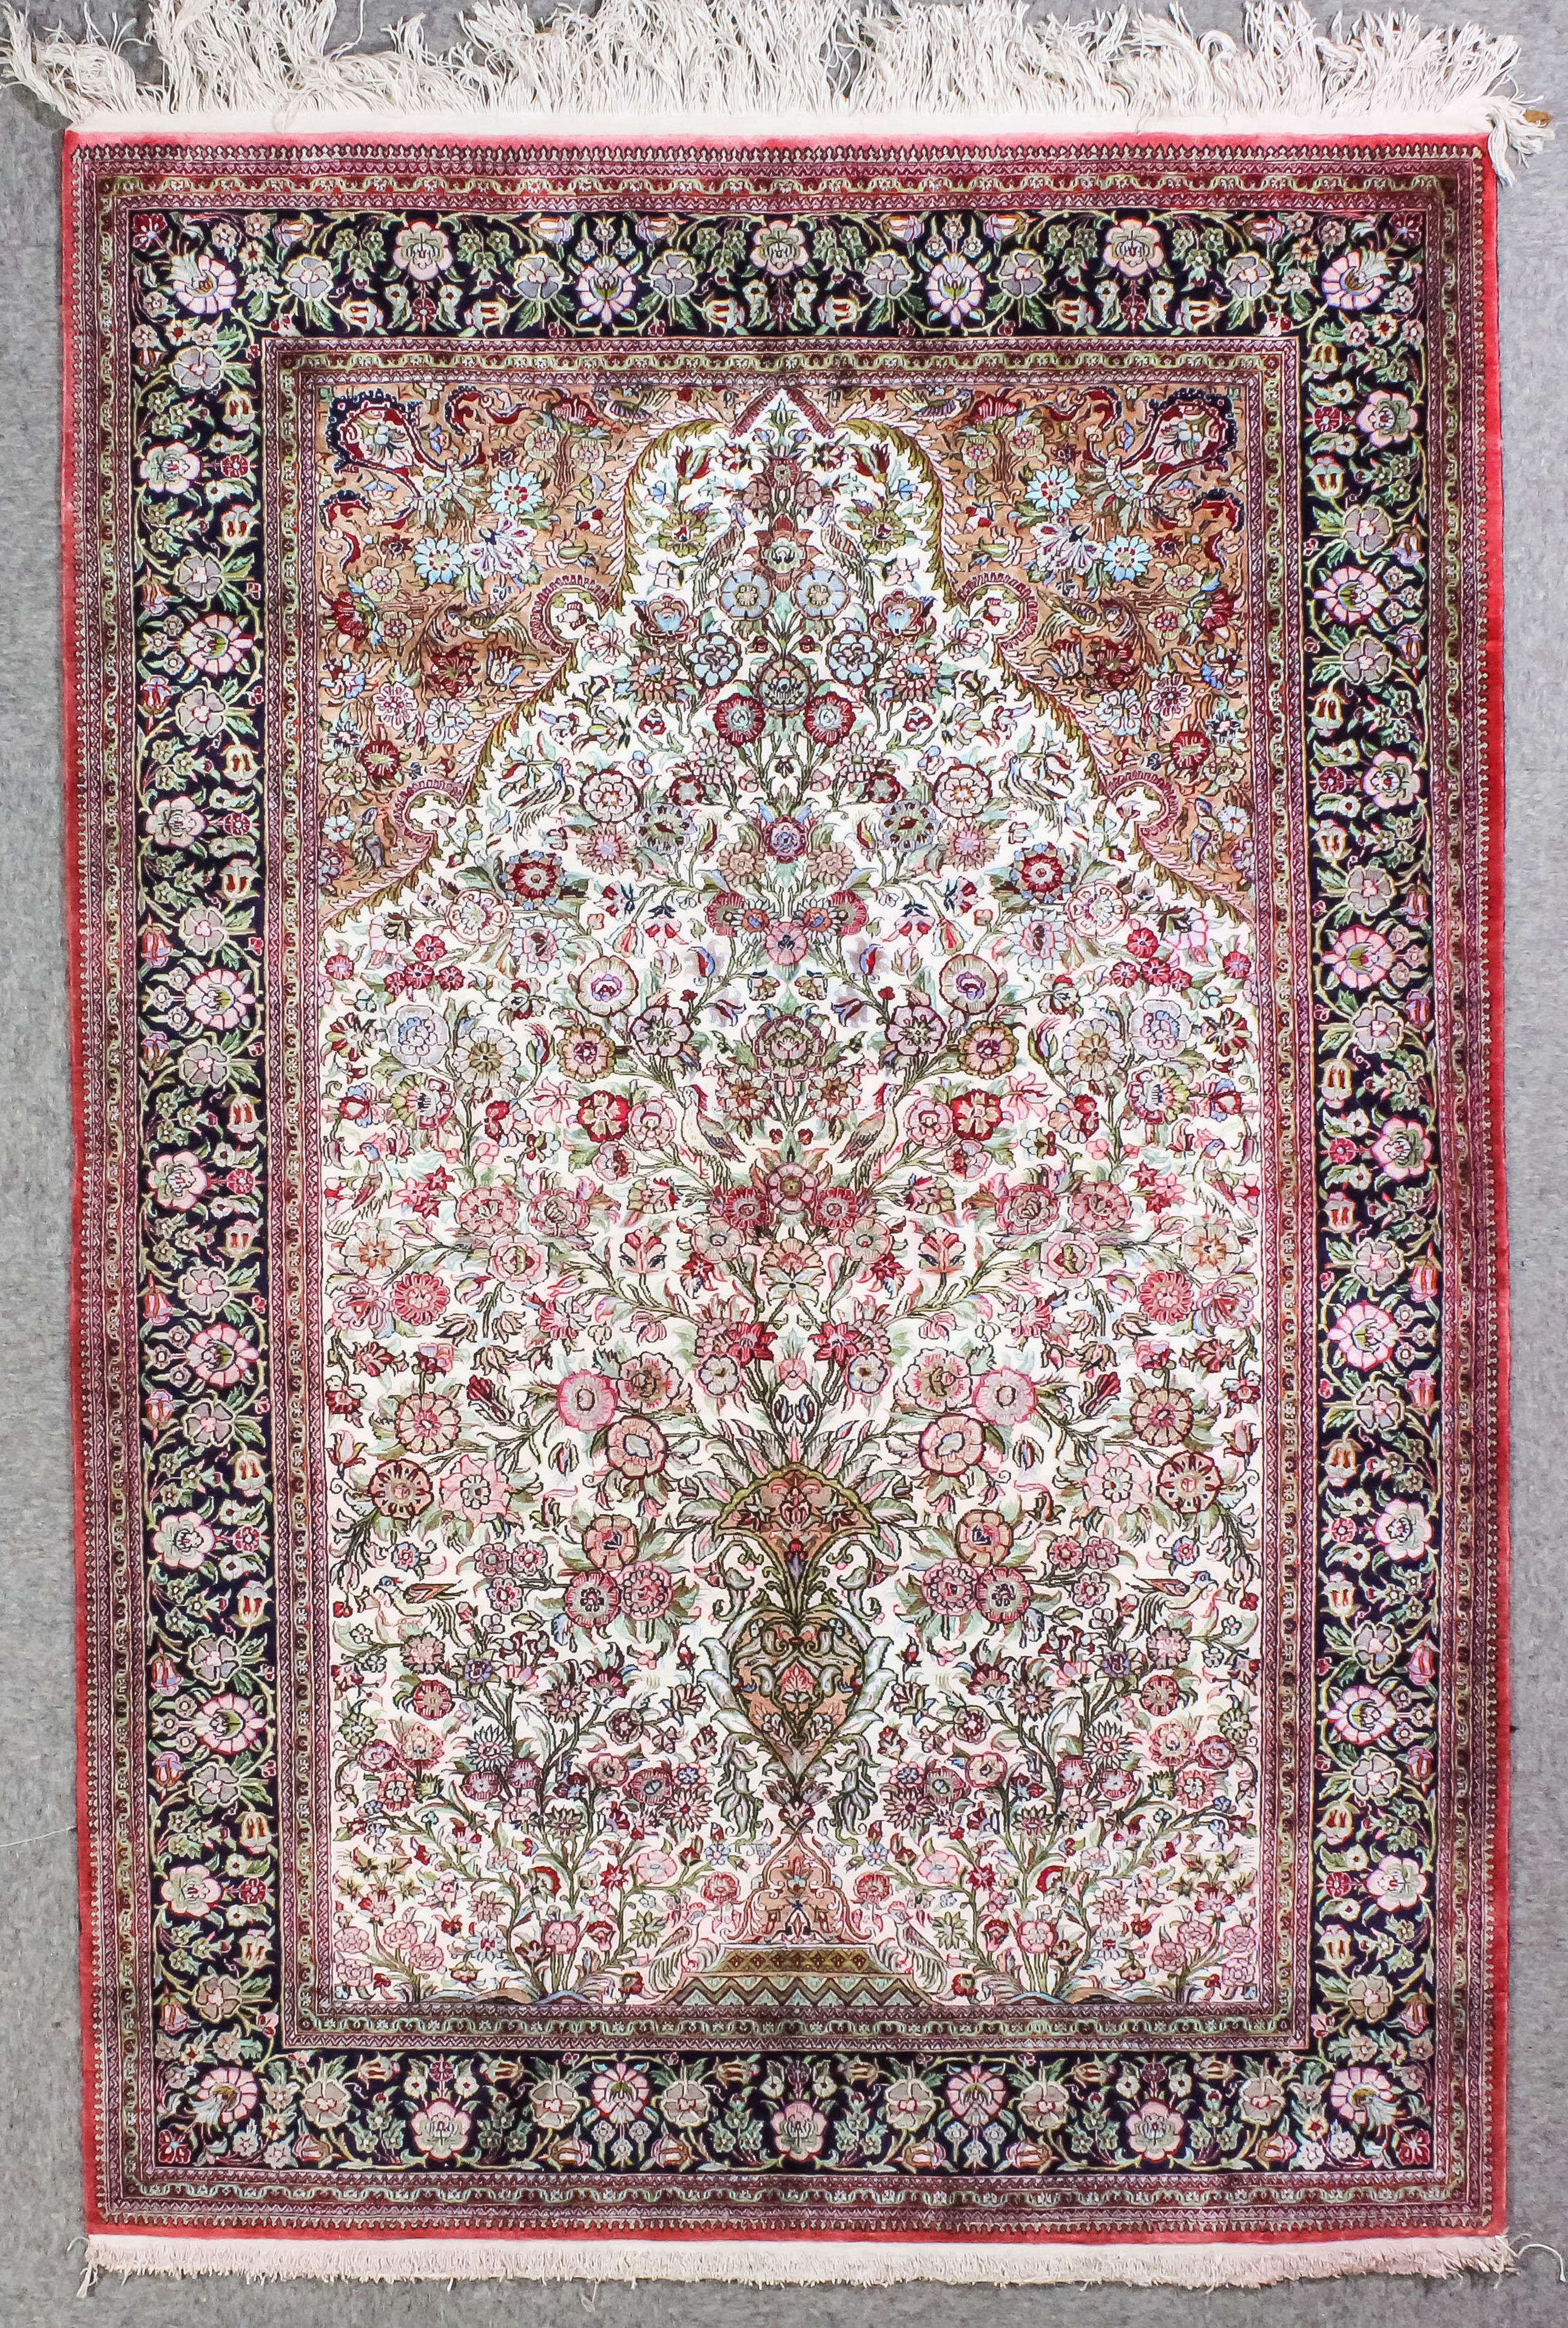 A Qum silk prayer rug woven in colours with a central mihrab filled with vase of flowers and birds